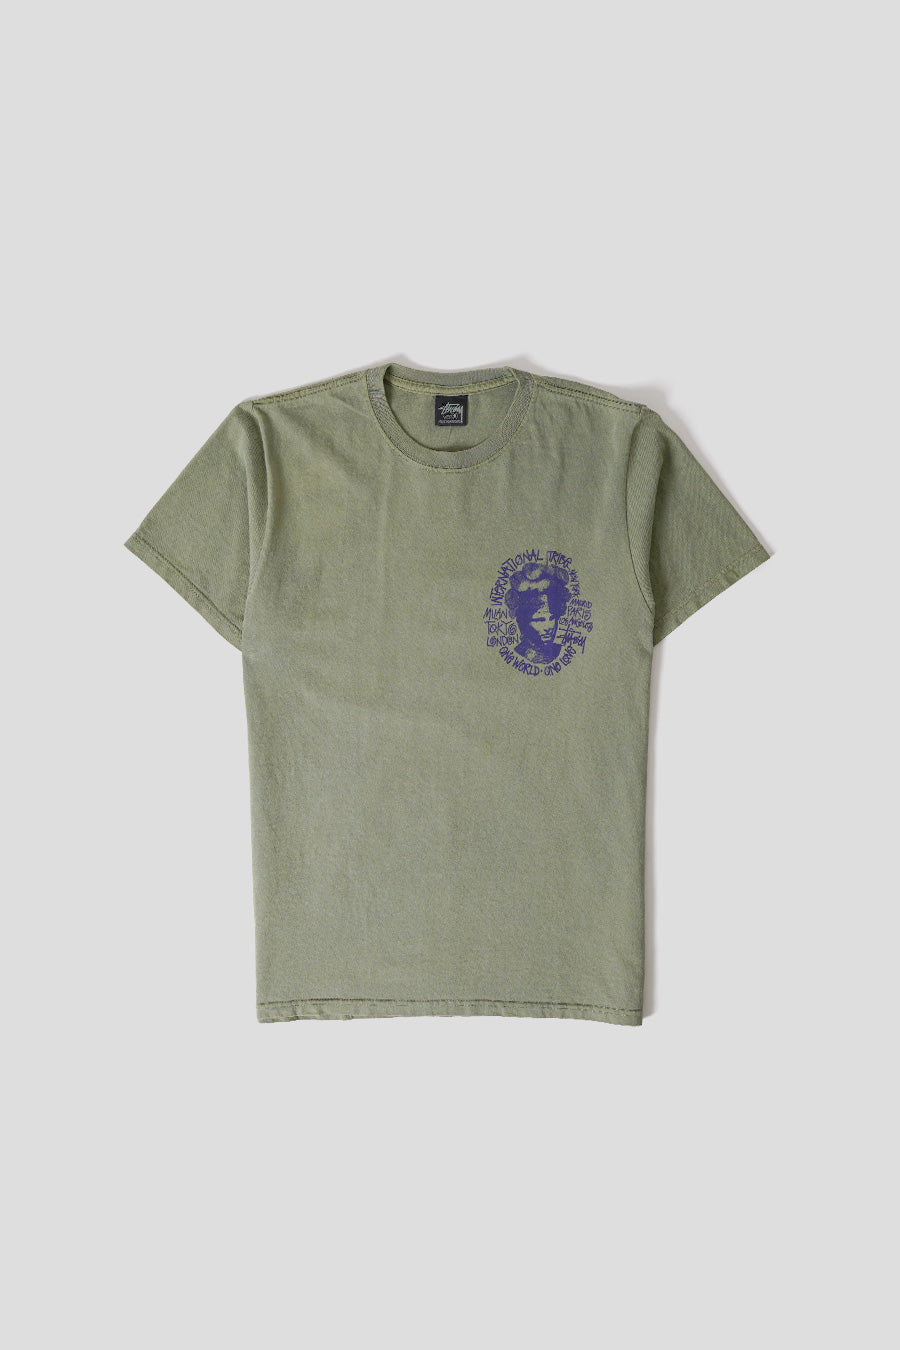 Stussy - T-SHIRT CAMELOT PIG DYED VERT OLIVE - LE LABO STORE